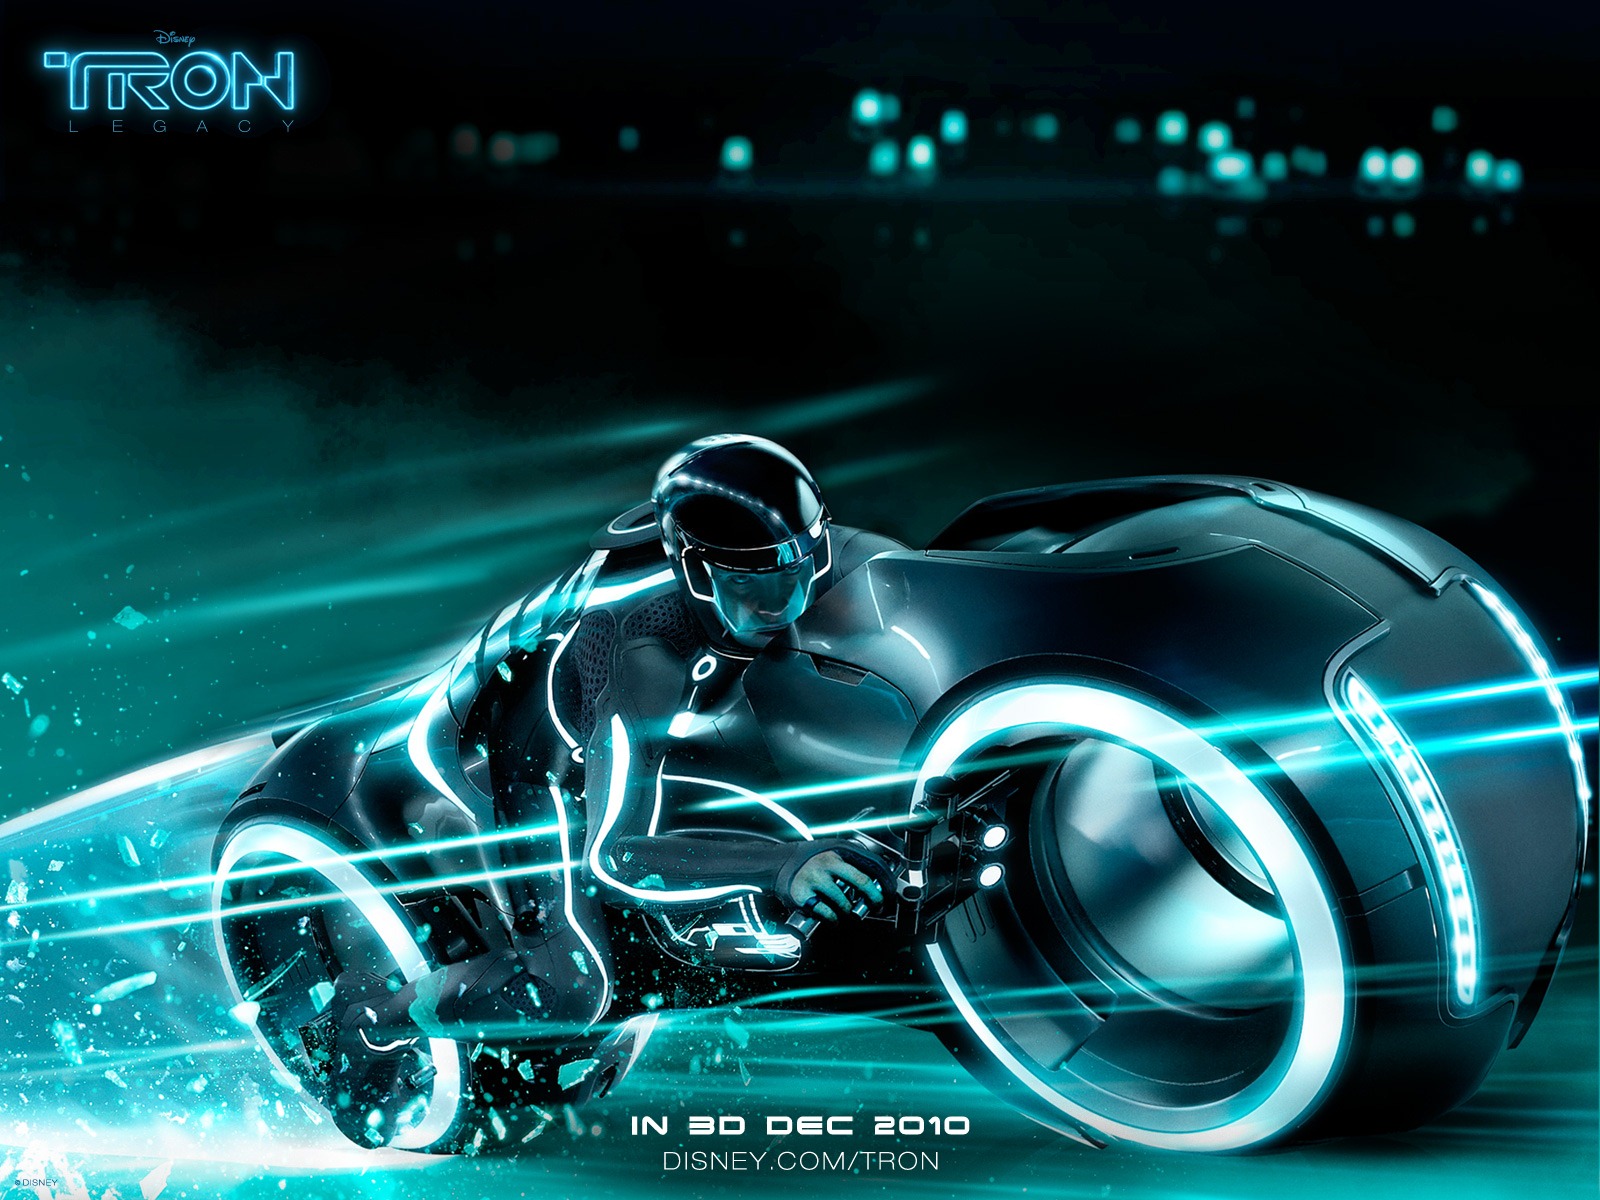 This Tron Legacy HD 1080p Wallpaper And Place Them On Your